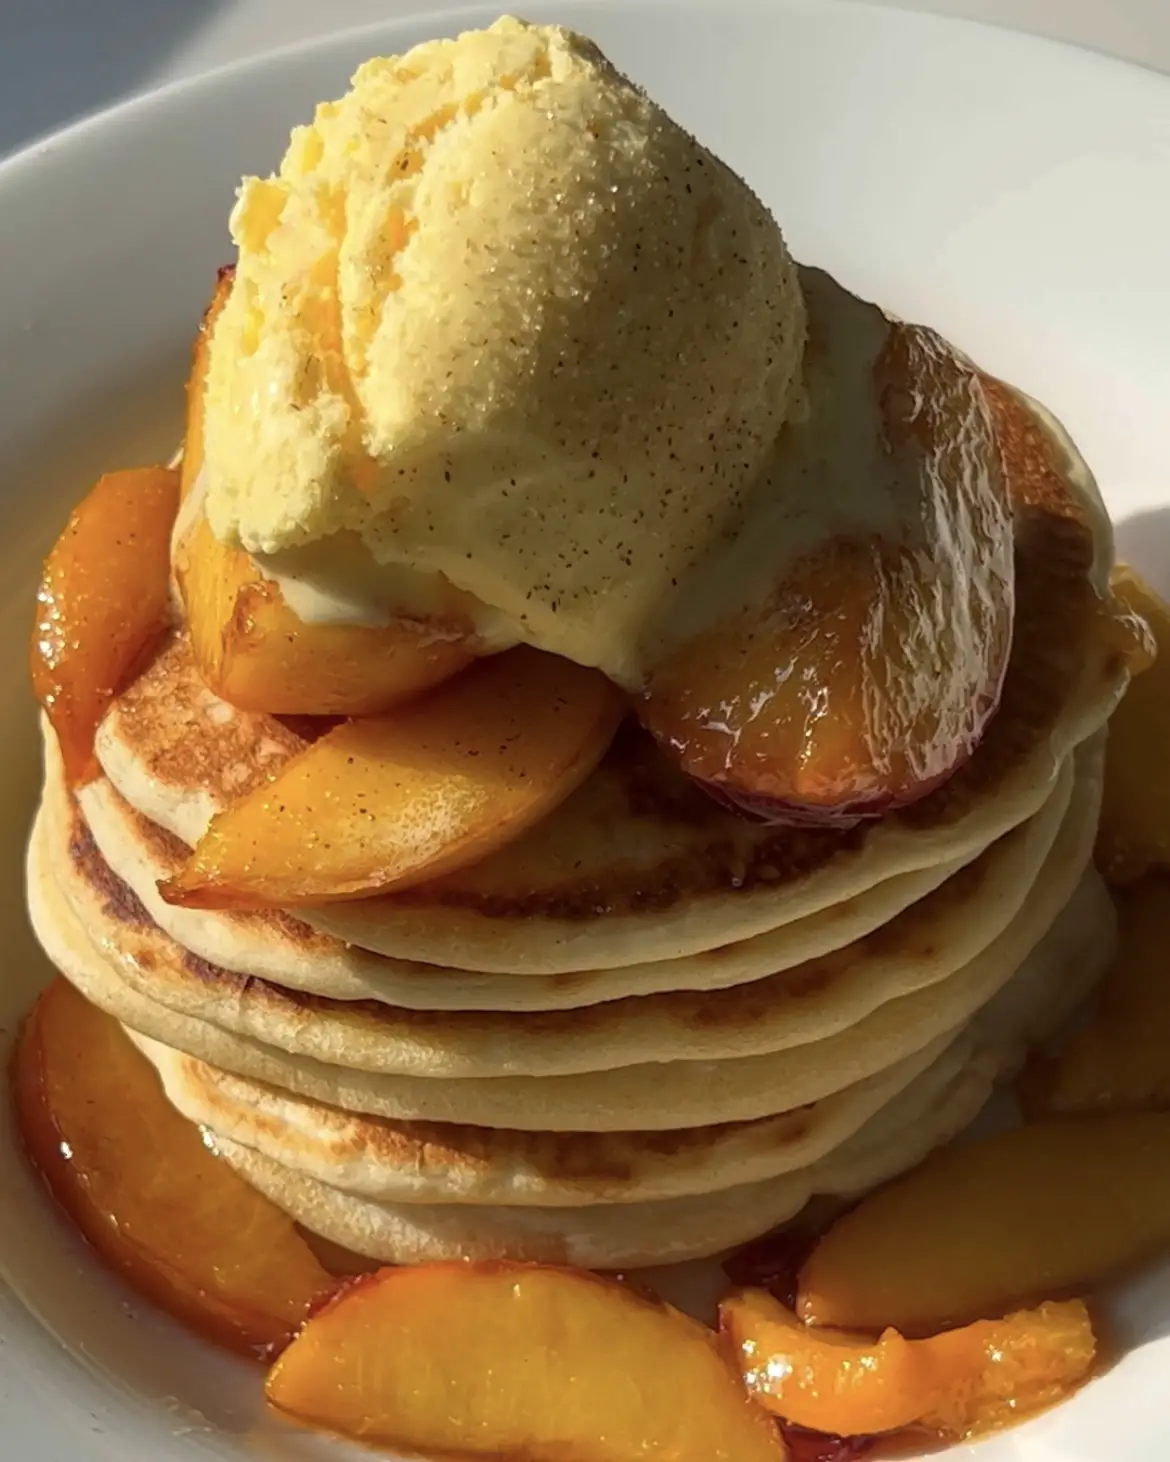 Stack the peaches and ice cream pancakes